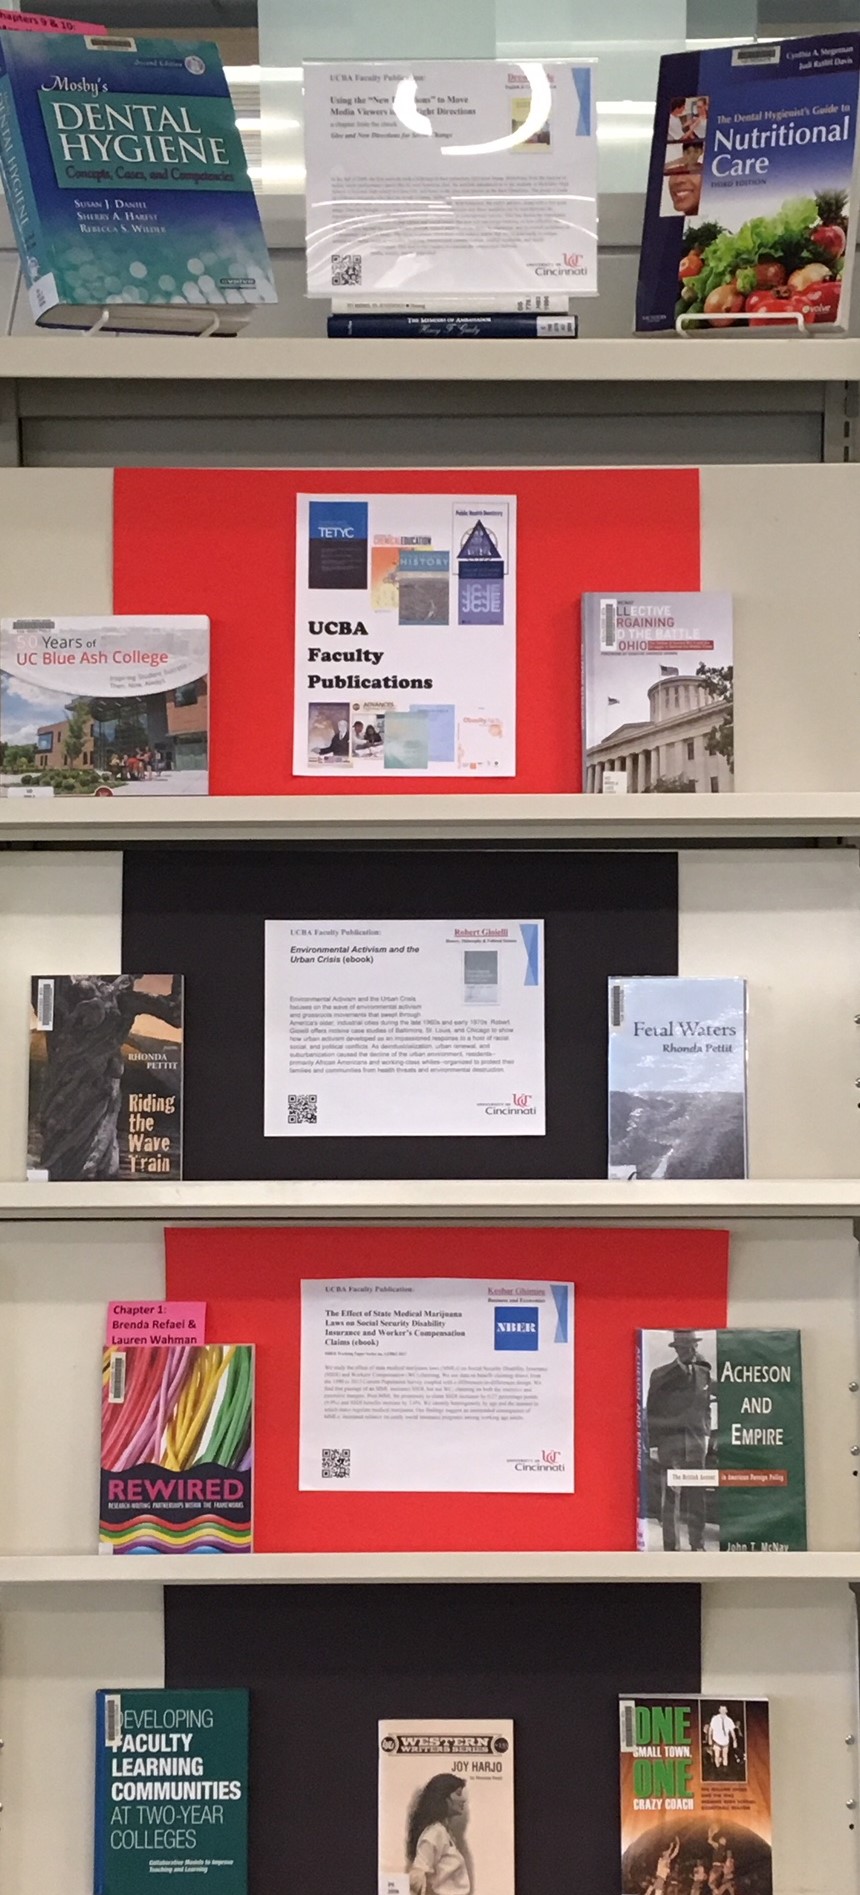 Faculty publications book display